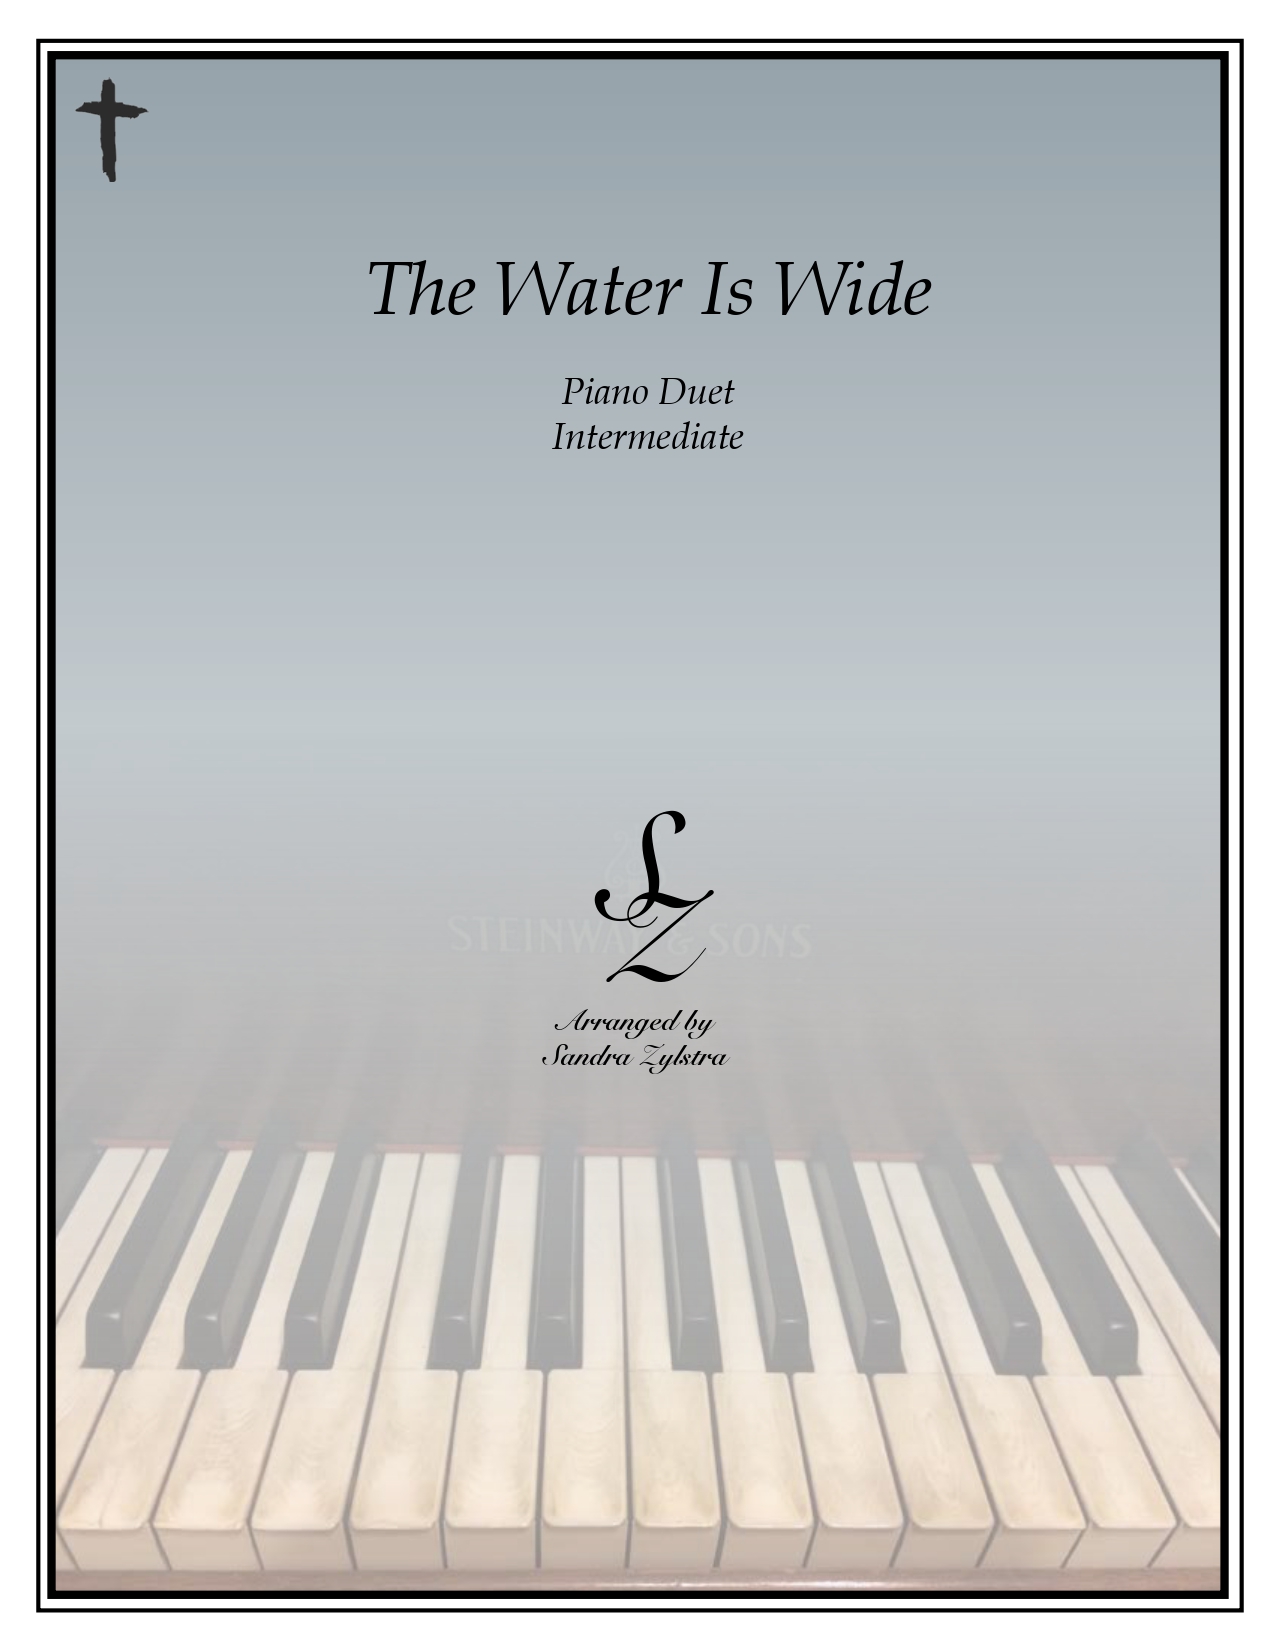 The Water Is Wide intermediate duet cover page 00011